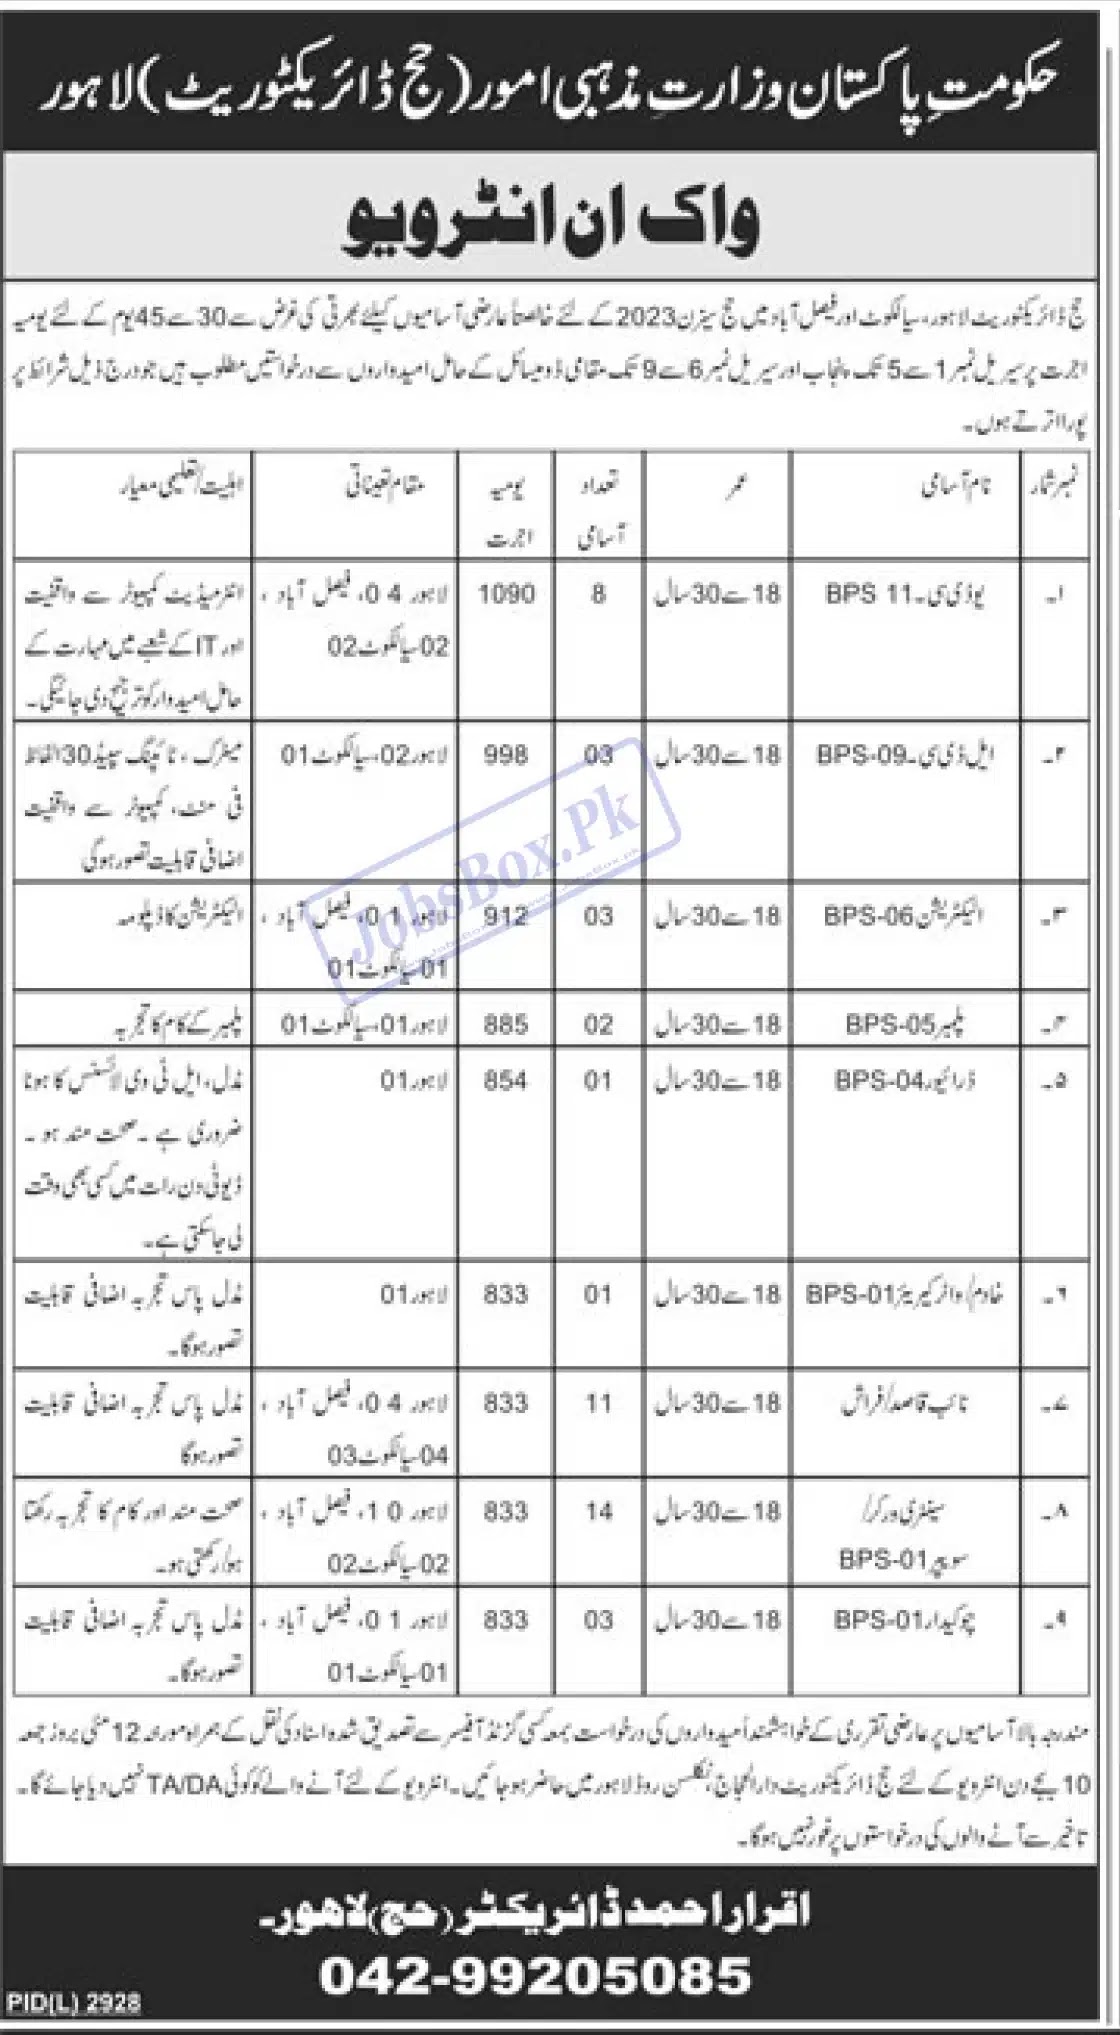 Ministry of Religious Affairs Jobs in 2023